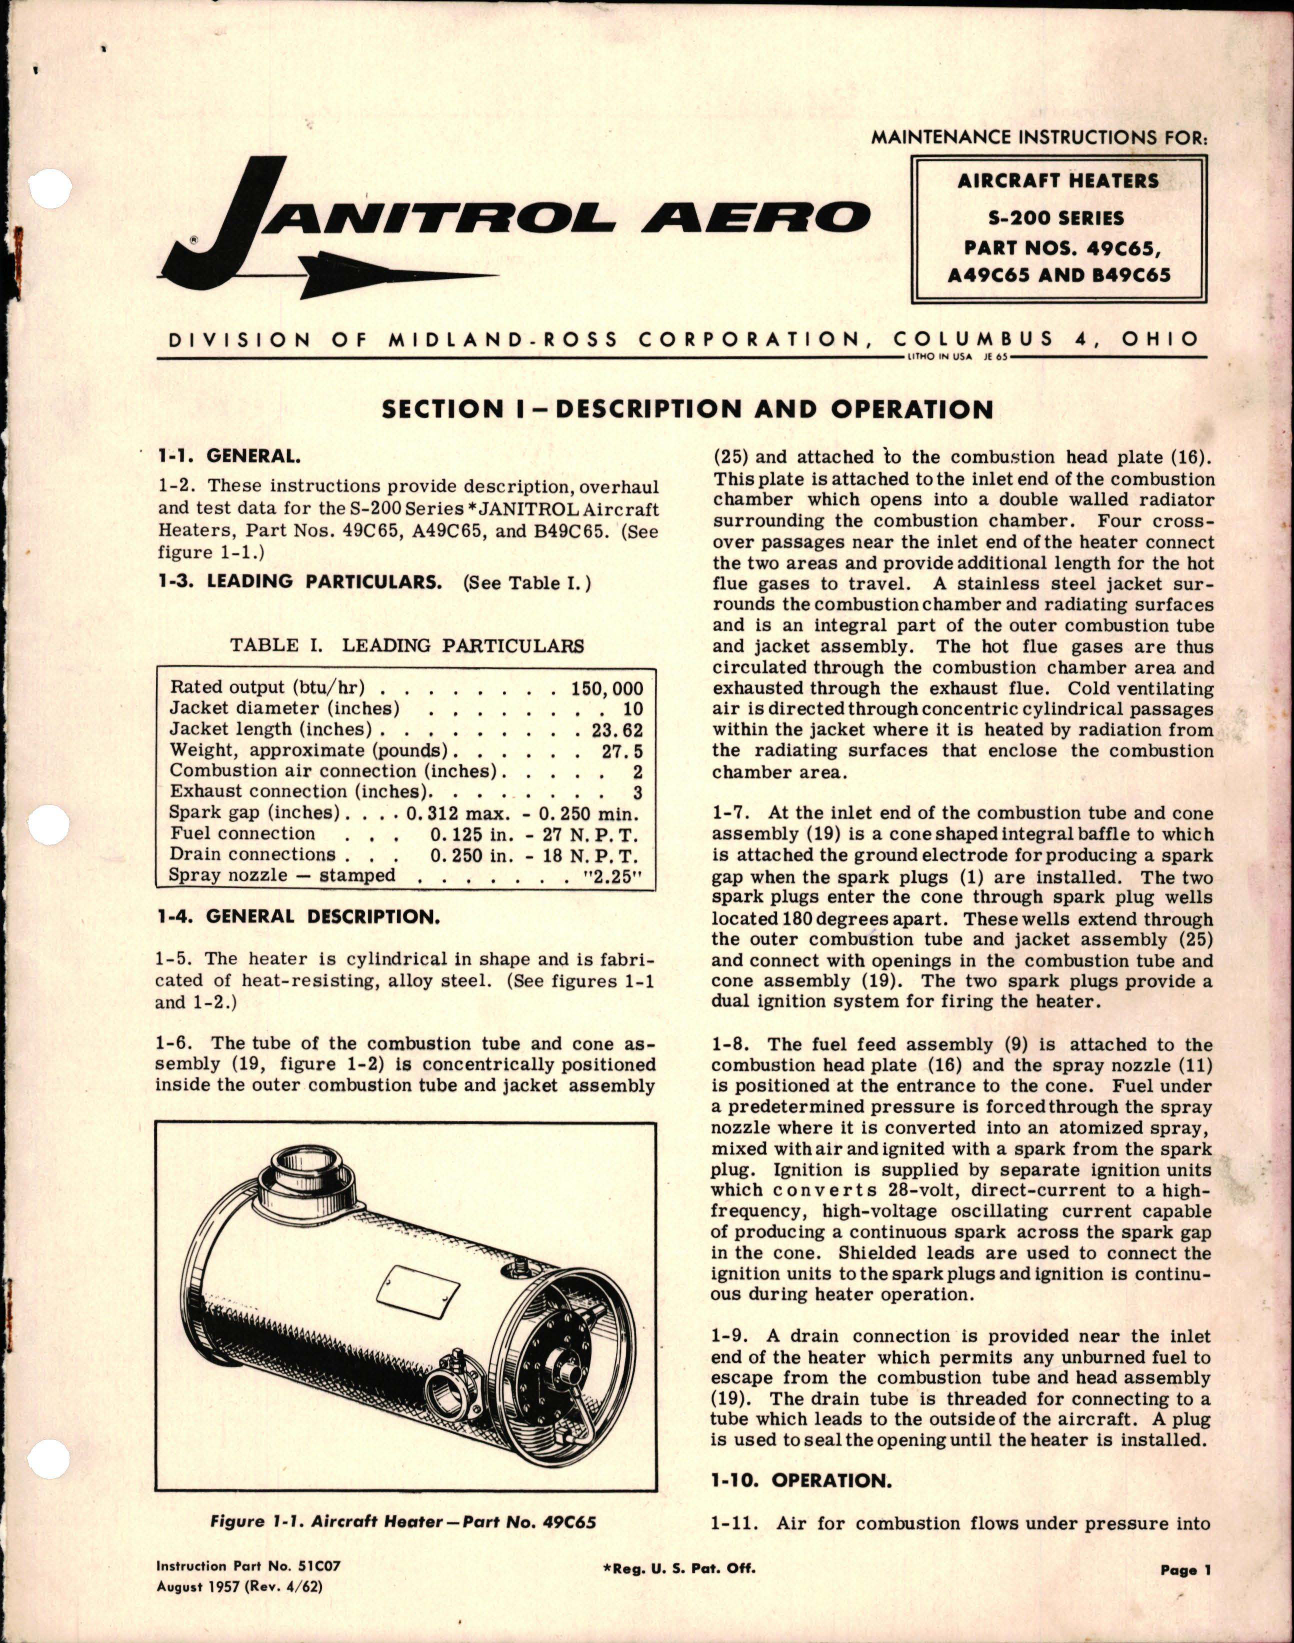 Sample page 1 from AirCorps Library document: Maintenance Instructions for Aircraft Heaters - S-200 Series - Parts 49C65, A49C65, and B49C65 